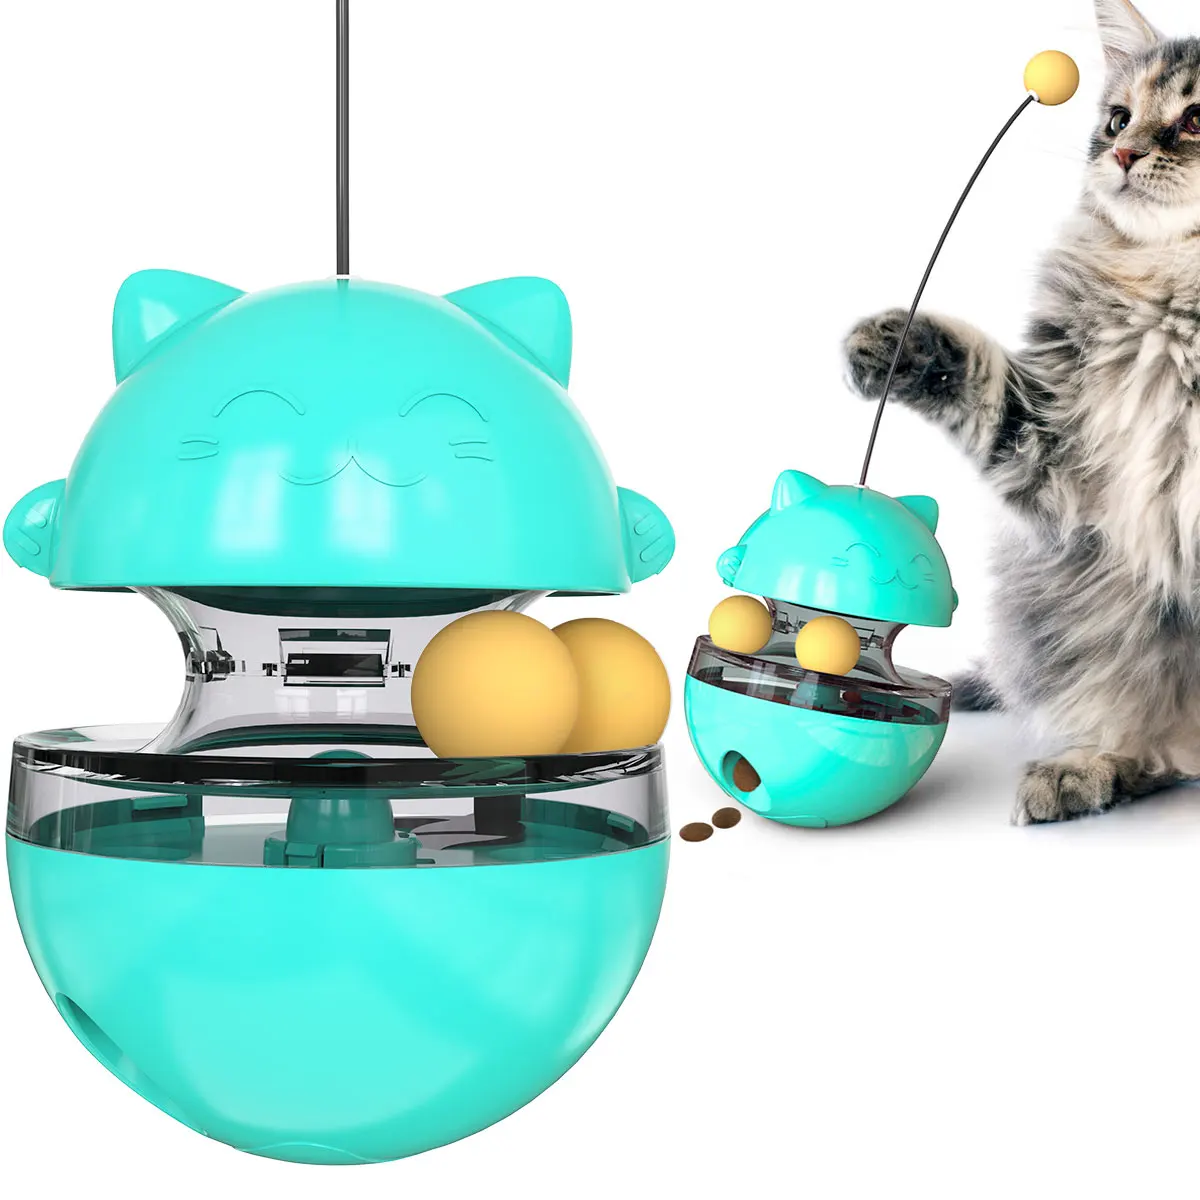 

Cheap Cute Electric Fancy Toys Cat And Dog Tumbler Toy For Dogs And Cats